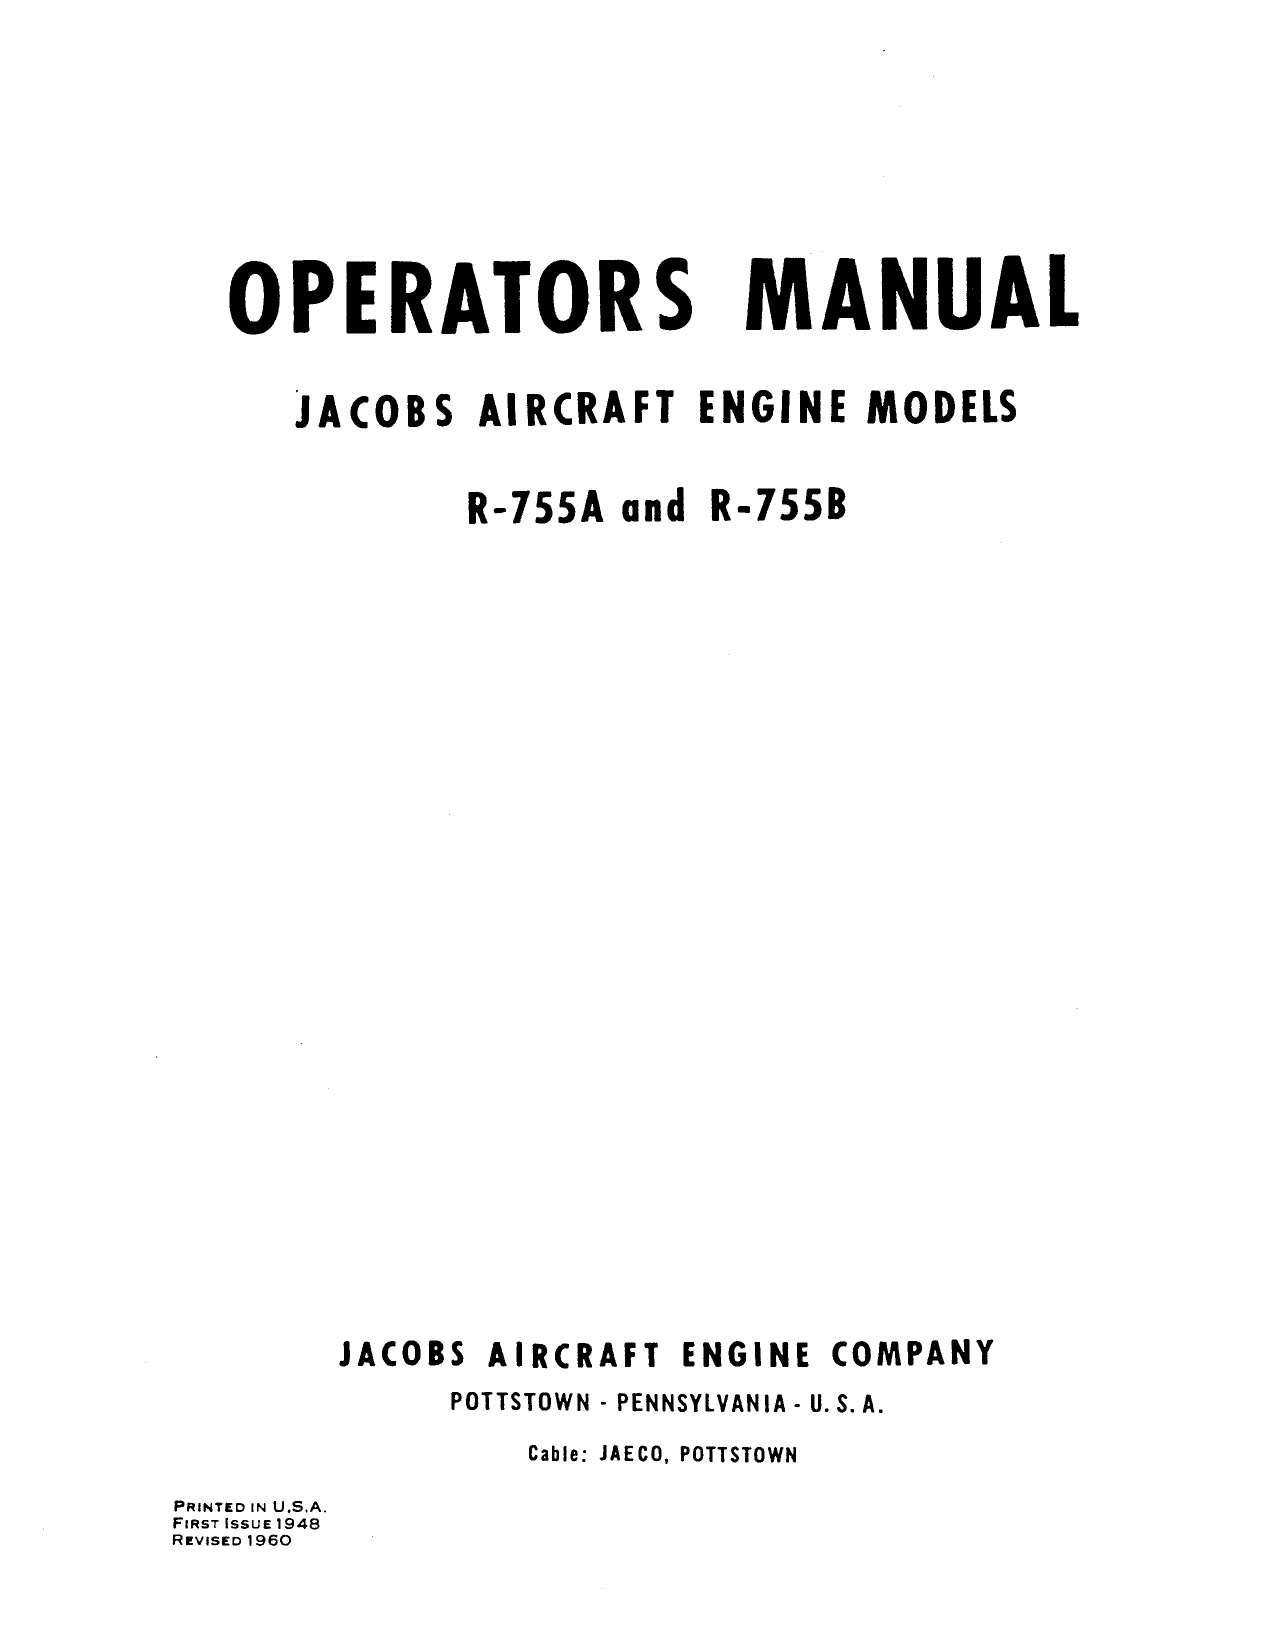 Sample page 1 from AirCorps Library document: Operators Manual for Jacobs Aircraft Engine Models R-755A and R-755B